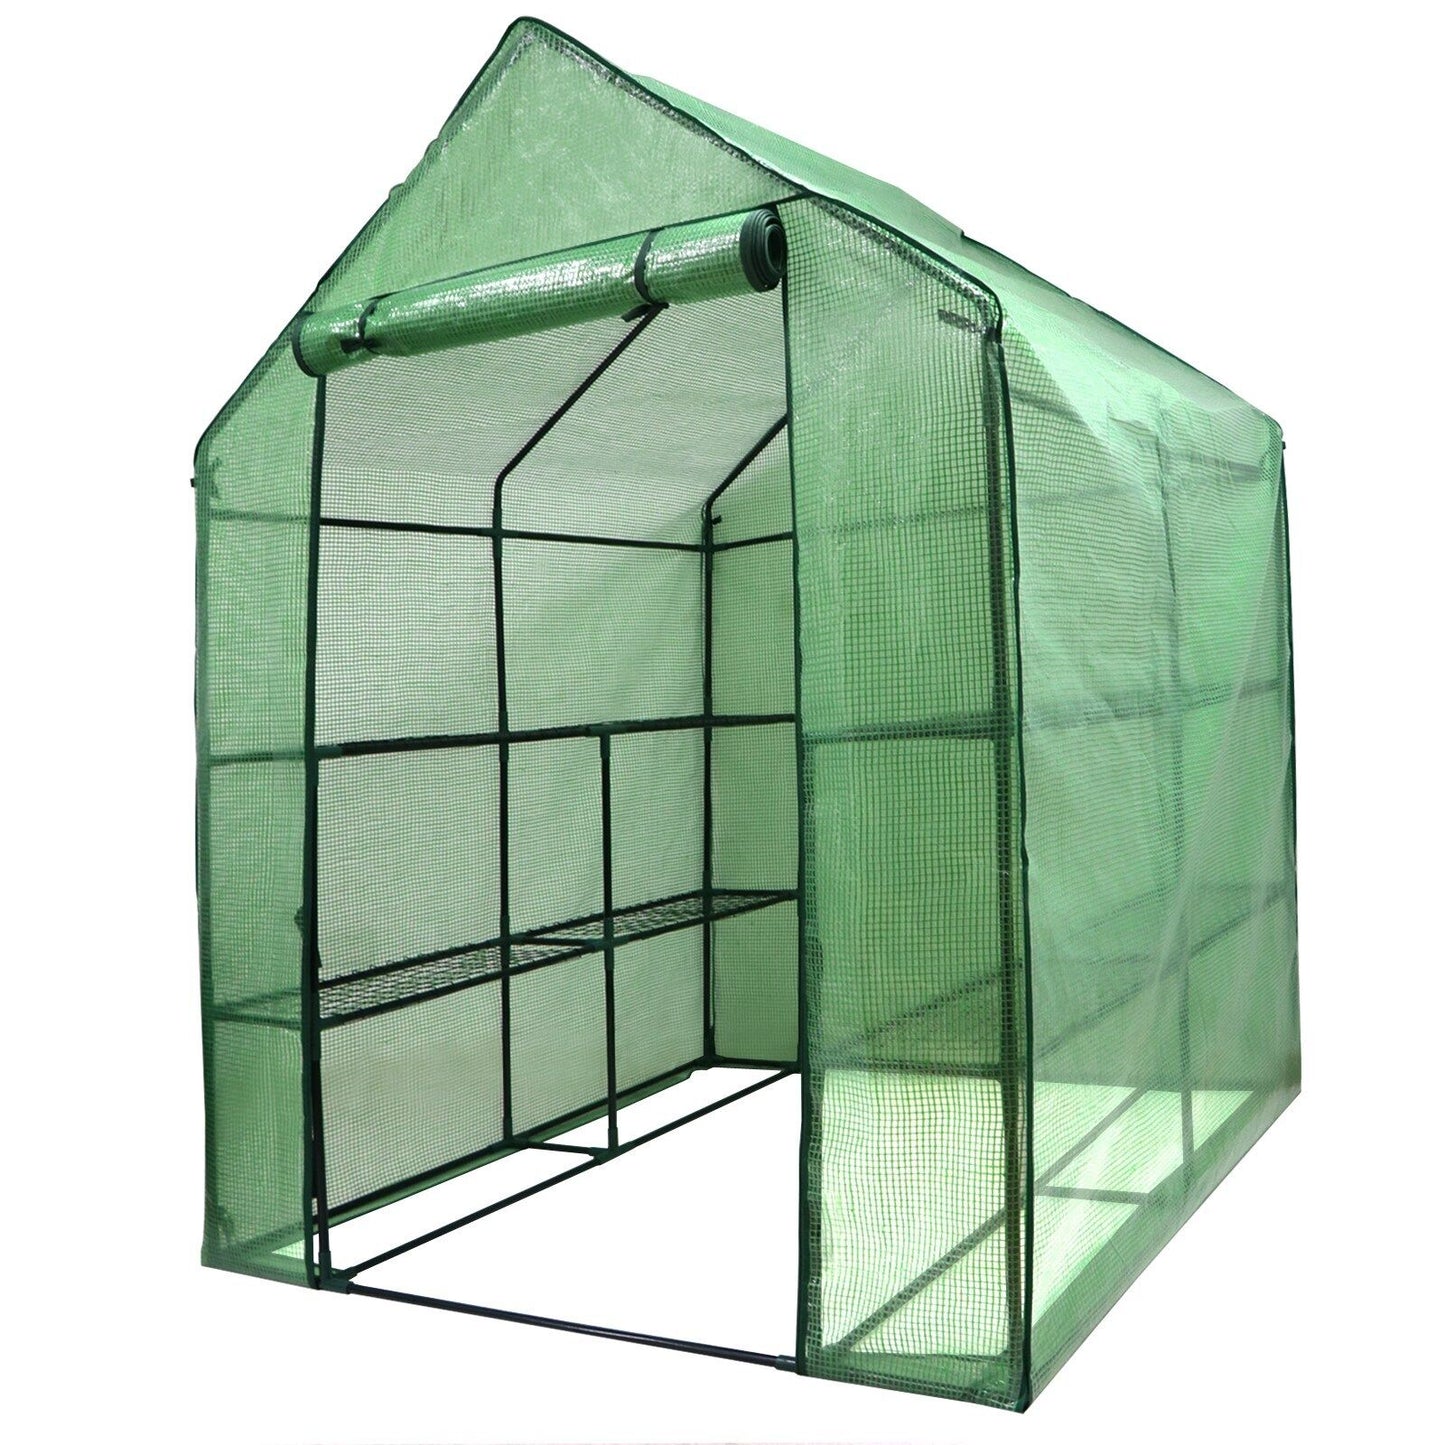 8 Shelves 3 Tiers Walk In Greenhouse for Planter Portable Green House Outdoor